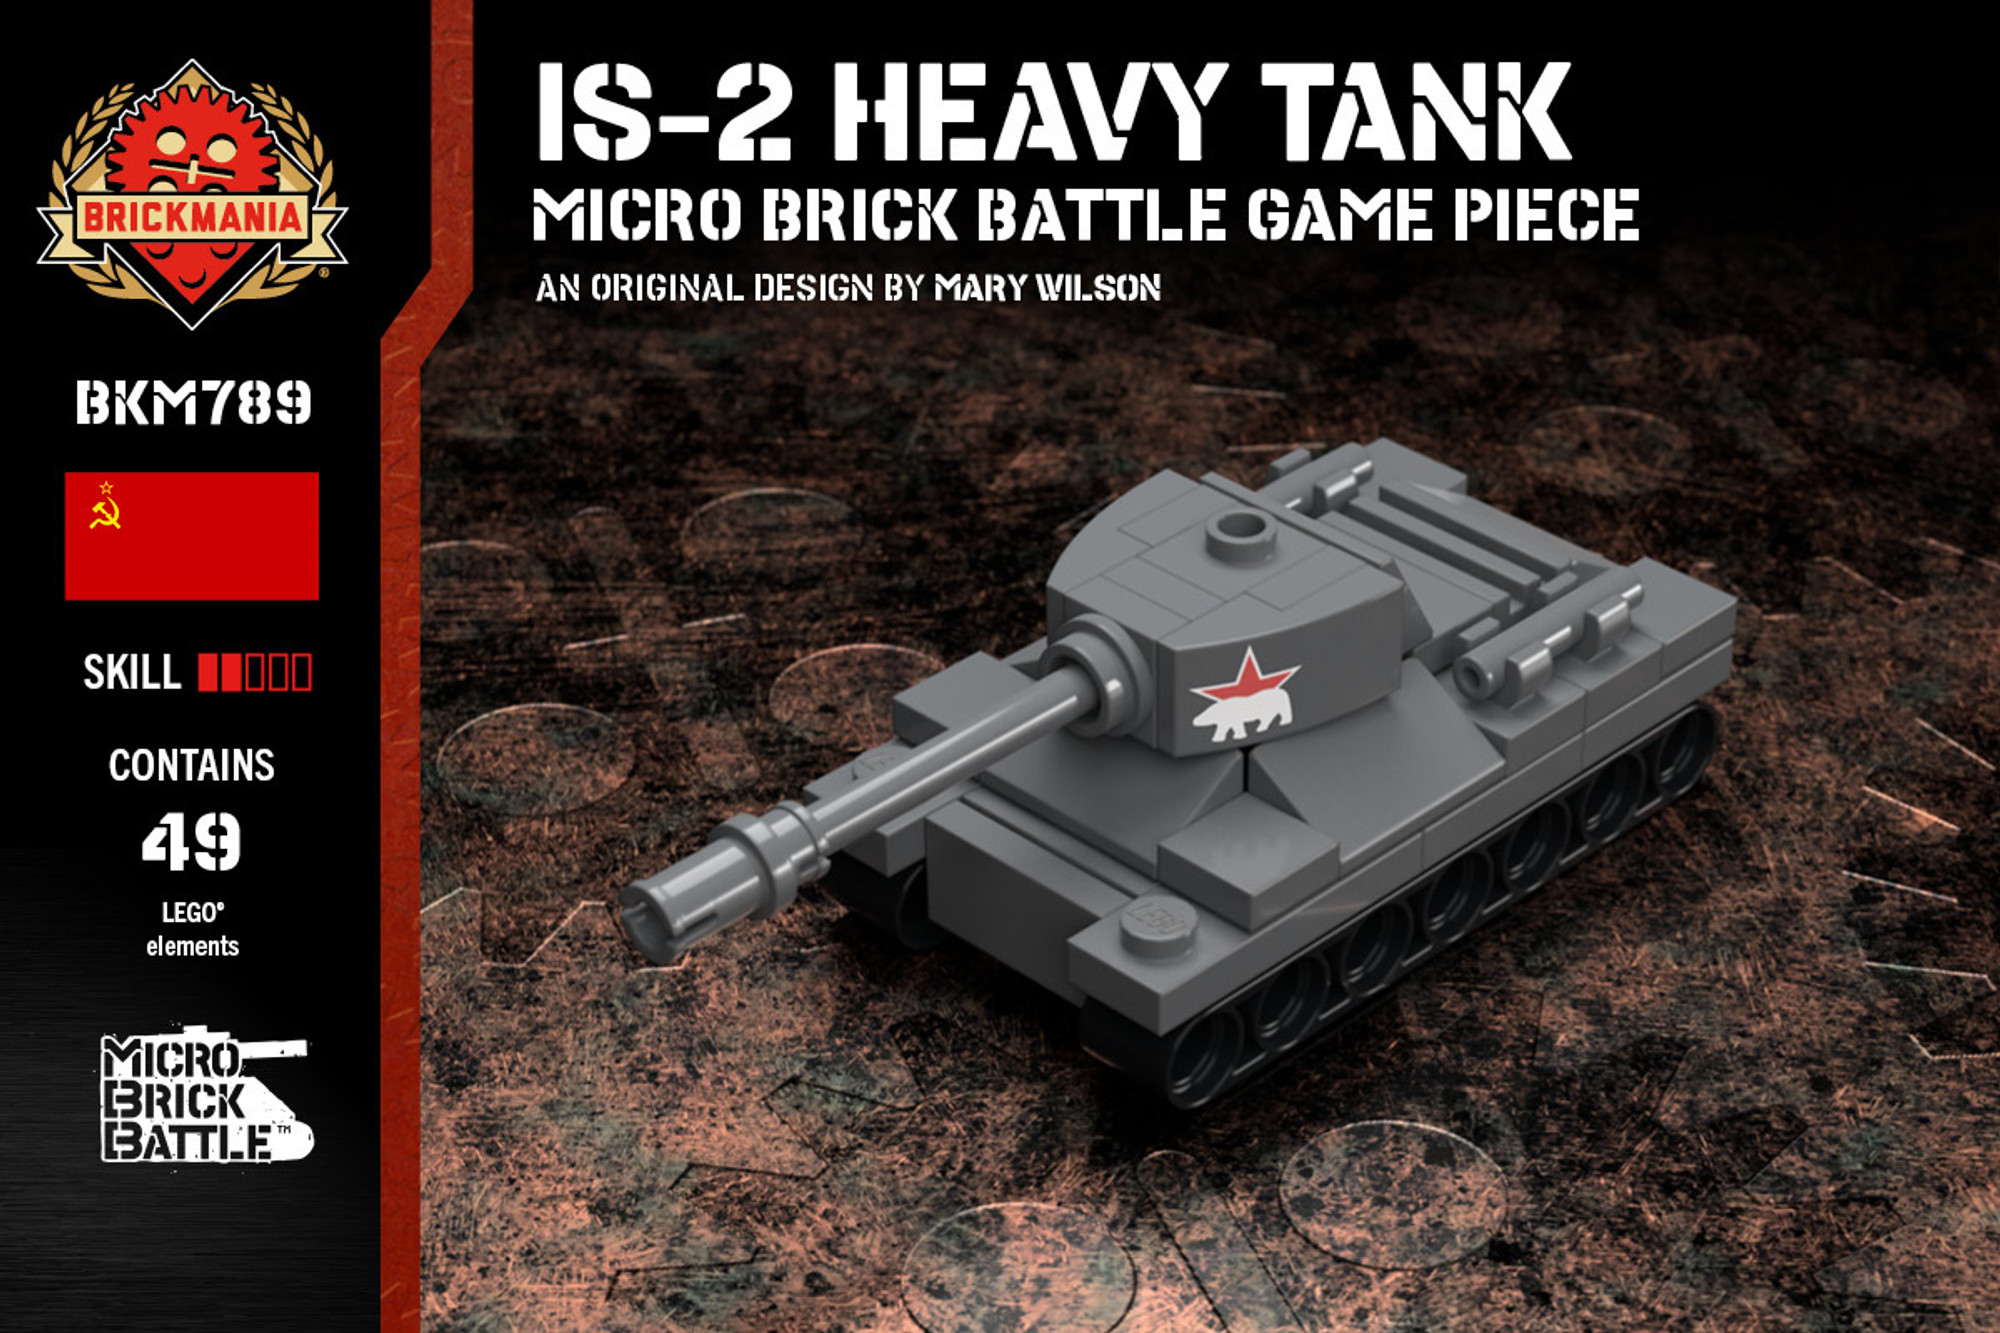 Brickmania Toys on X: We have released the M26 Pershing Micro-tank, which  is now available to order through our website! This Micro-tank pairs with  our tabletop Micro Brick Battle game. #chosinbricks #lego #